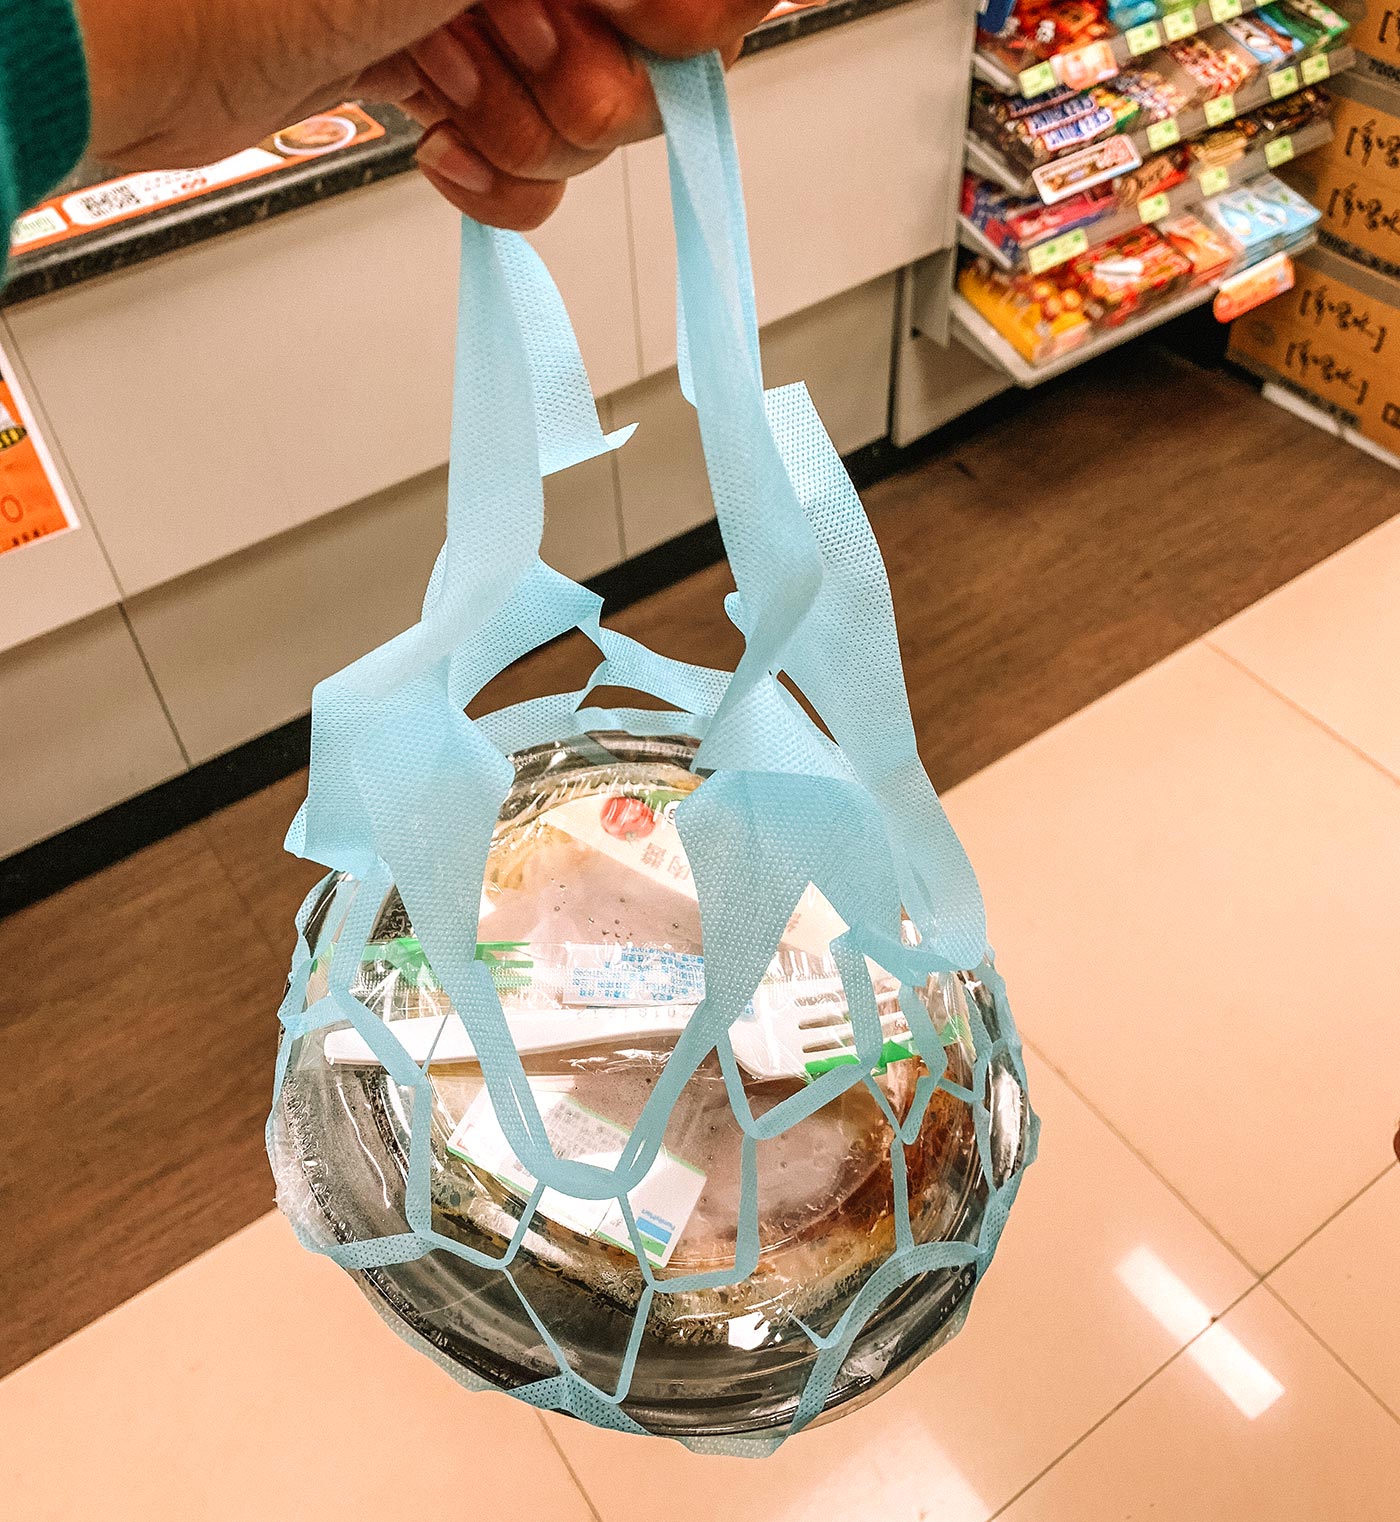 Taiwan 7-Eleven plastic-free hot food carrier bags